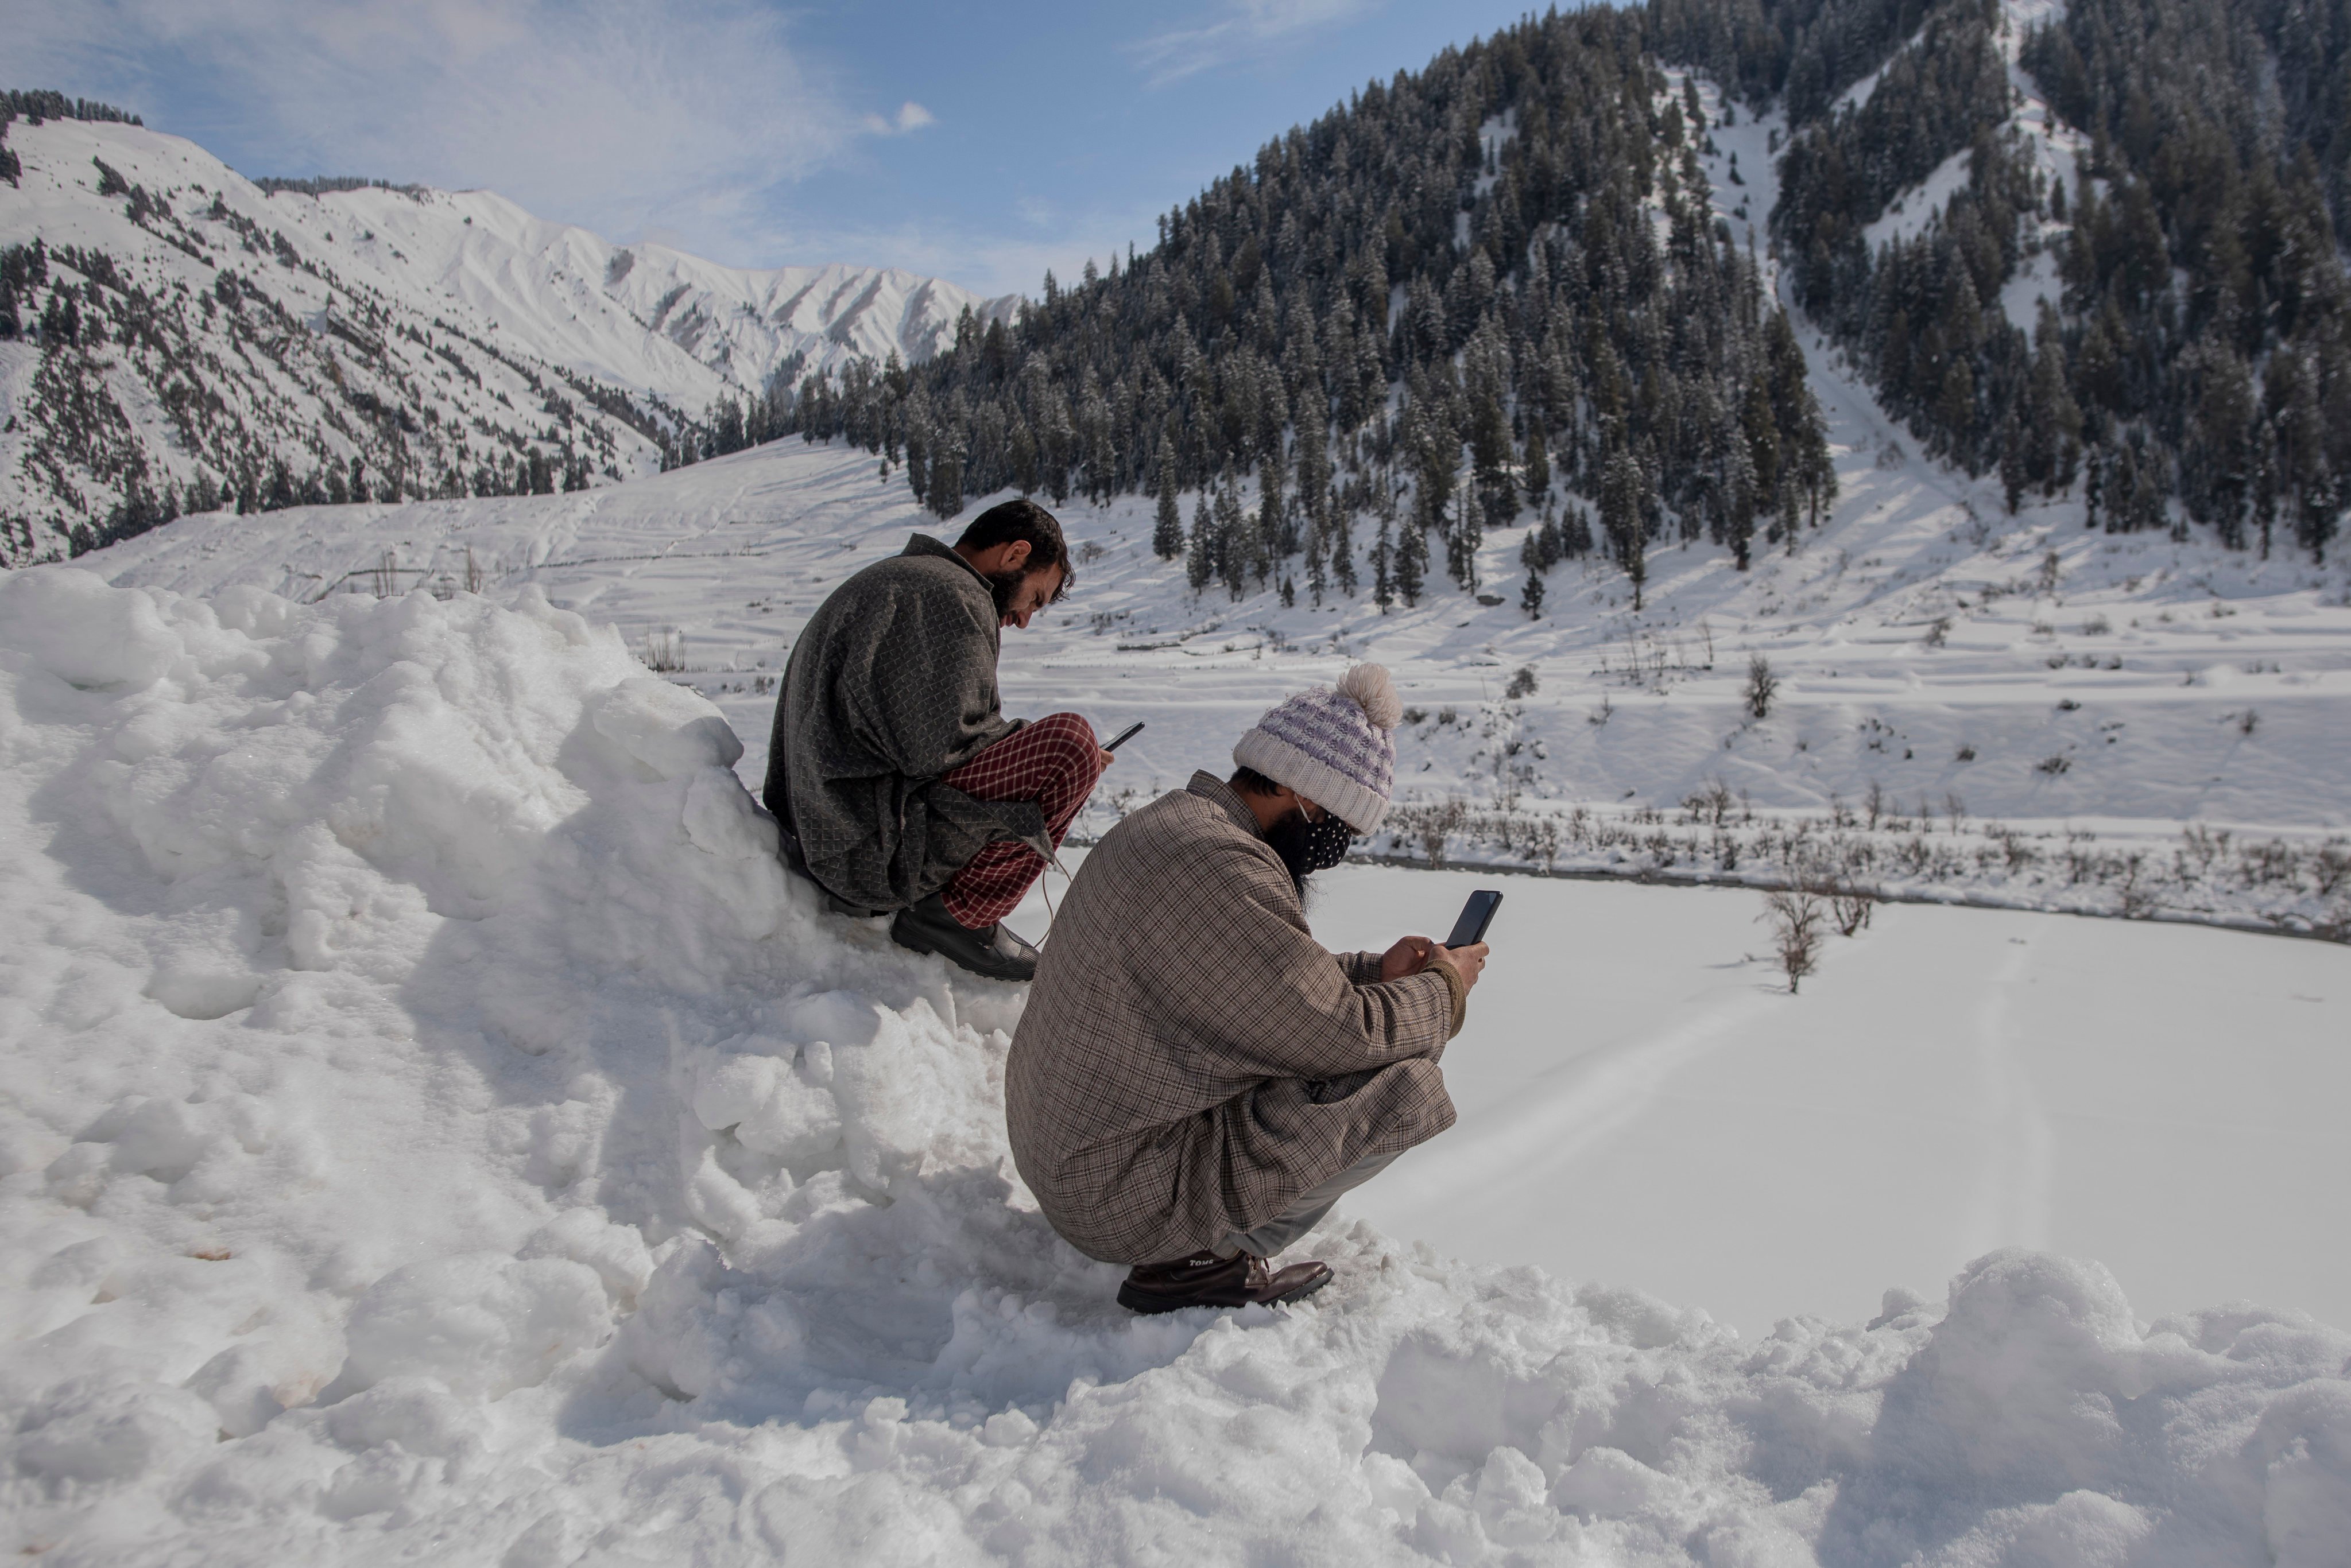 Asif (21) and Arif (25) from Achoora village, Gurez Valley, harness the power of the internet to showcase and celebrate its untamed beauty. Photo: Umar Altaf